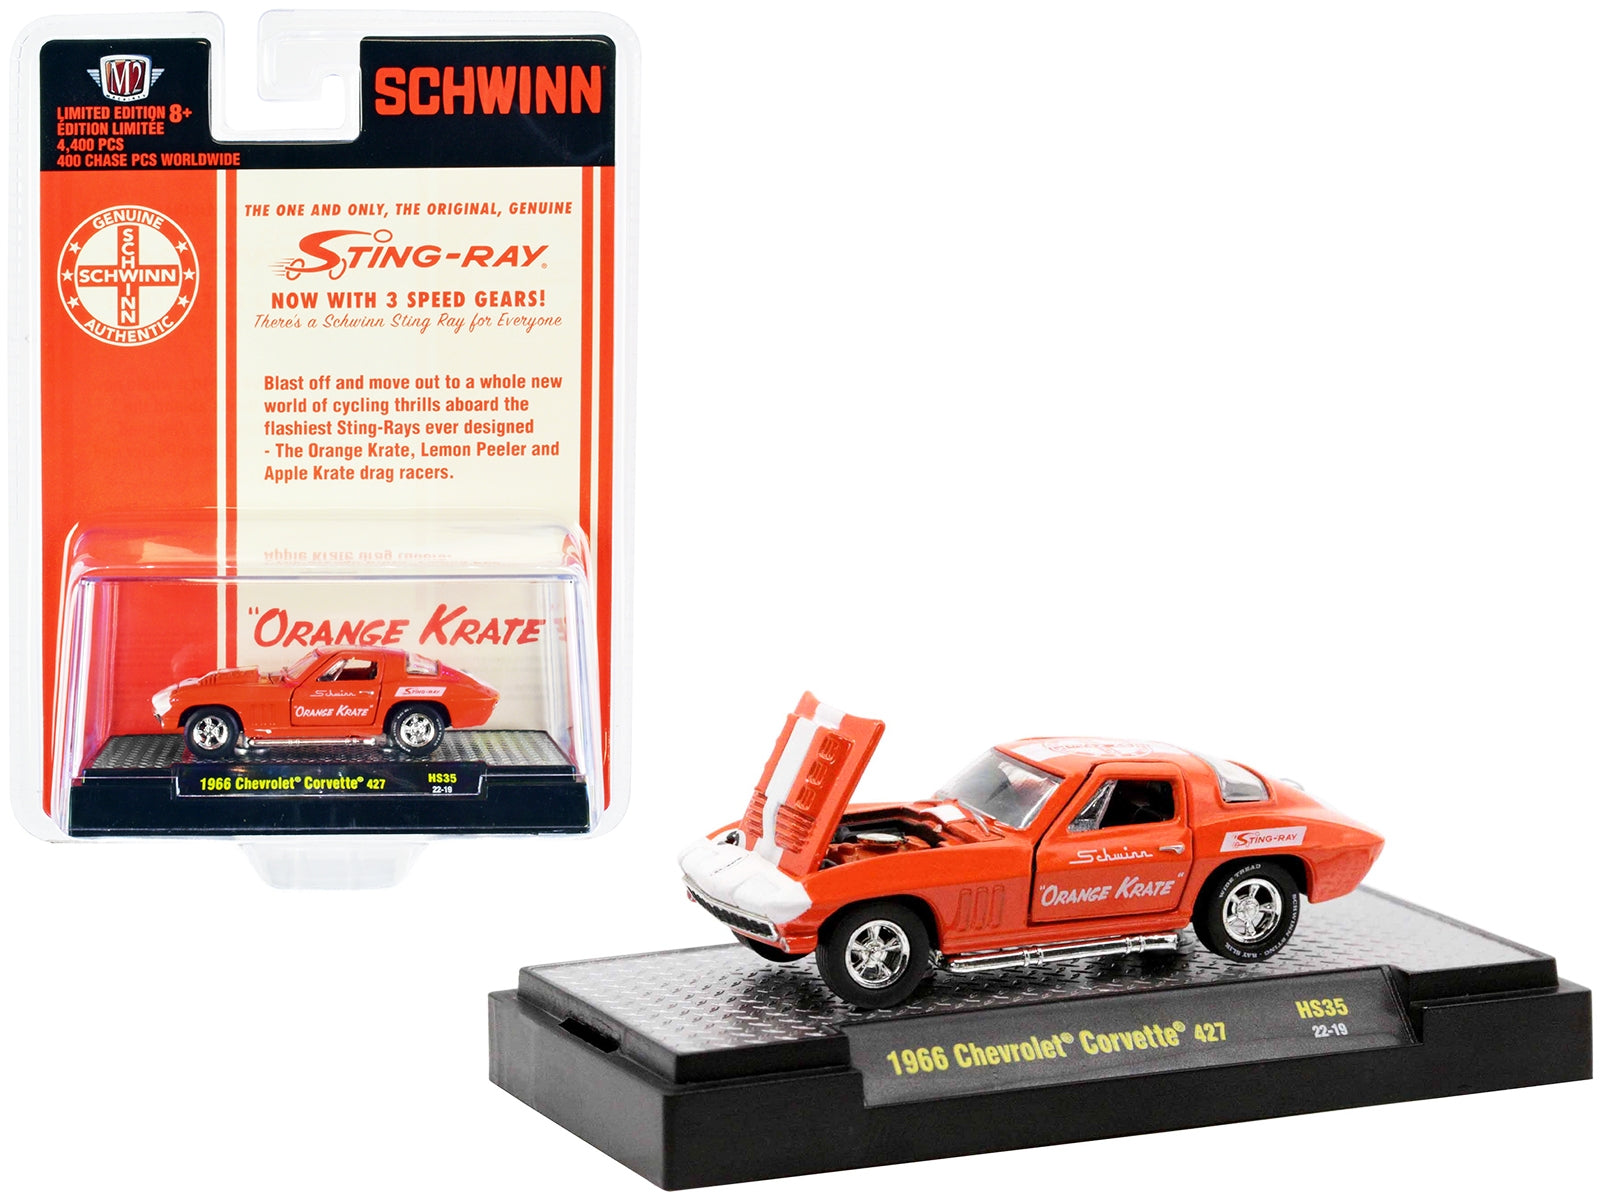 1966 Chevrolet Corvette 427 #68 Orange with White Stripes and Graphics "Schwinn Orange Krate" Limited Edition to 4400 pieces Worldwide 1/64 Diecast Model Car by M2 Machines